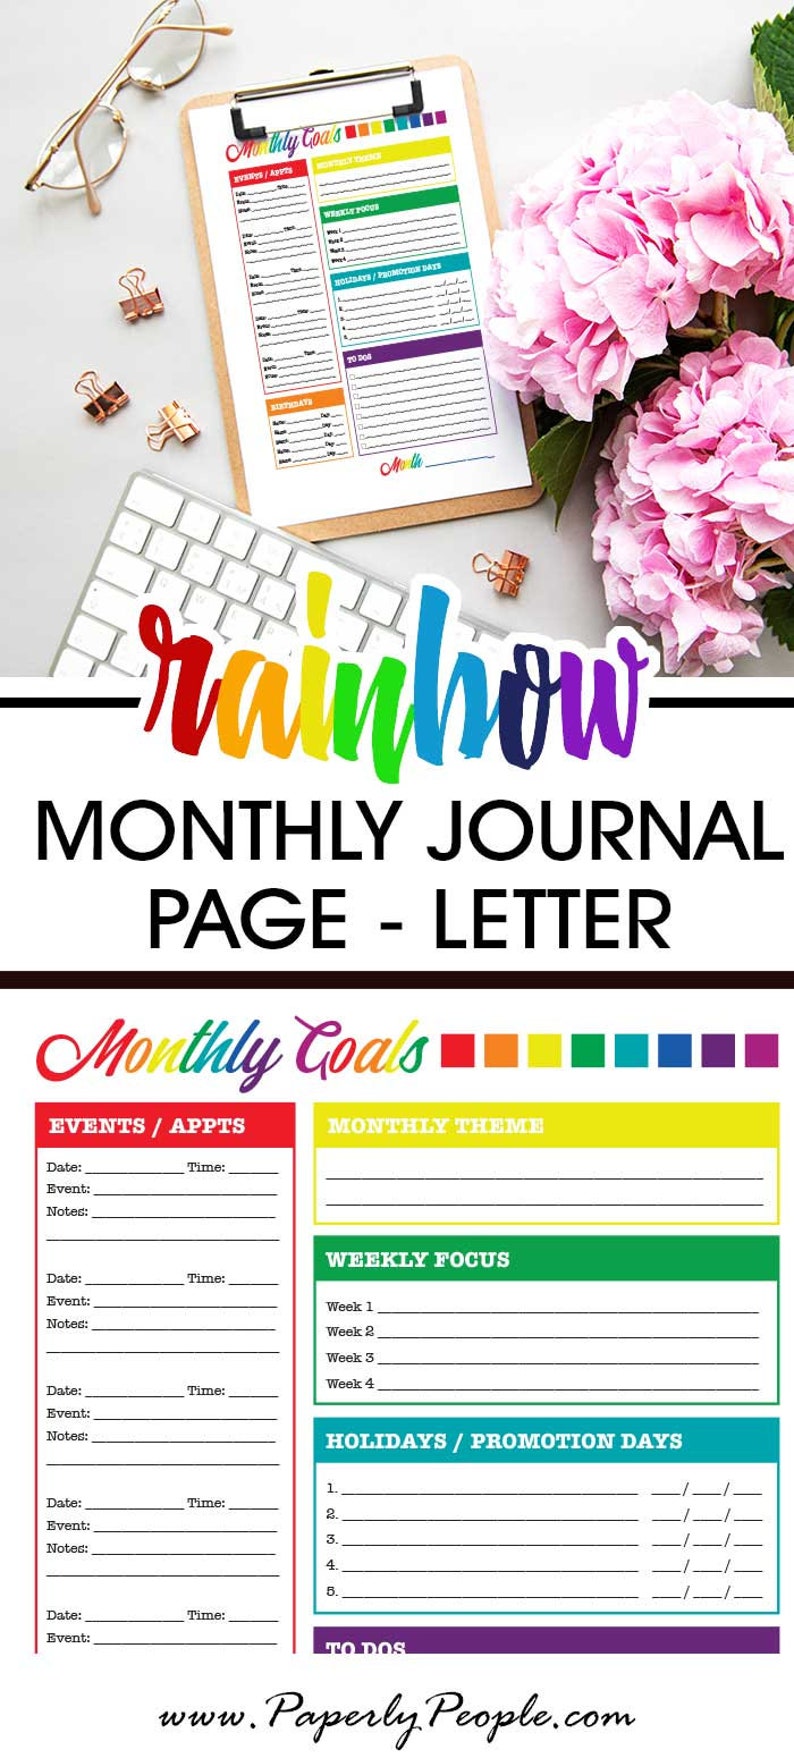 Rainbow Journal Monthly Printable Planner Page, US Letter Size 8.5 X 11, Planners Inserts, Colorful Pretty Cute Happy image 3